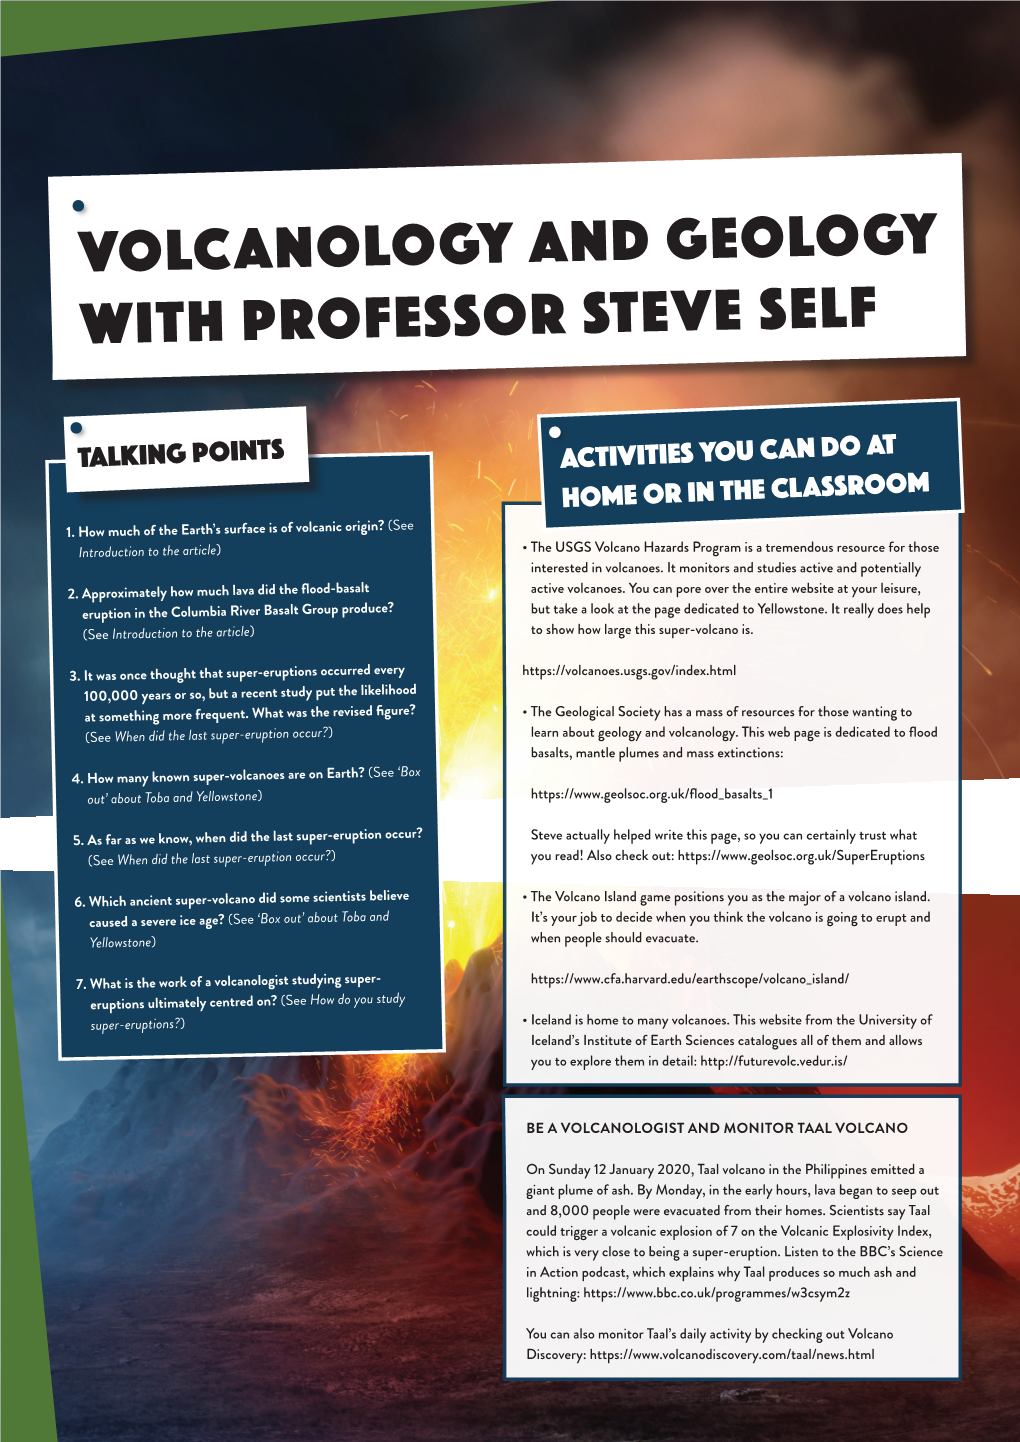 Volcanology and Geology with Professor Steve Self